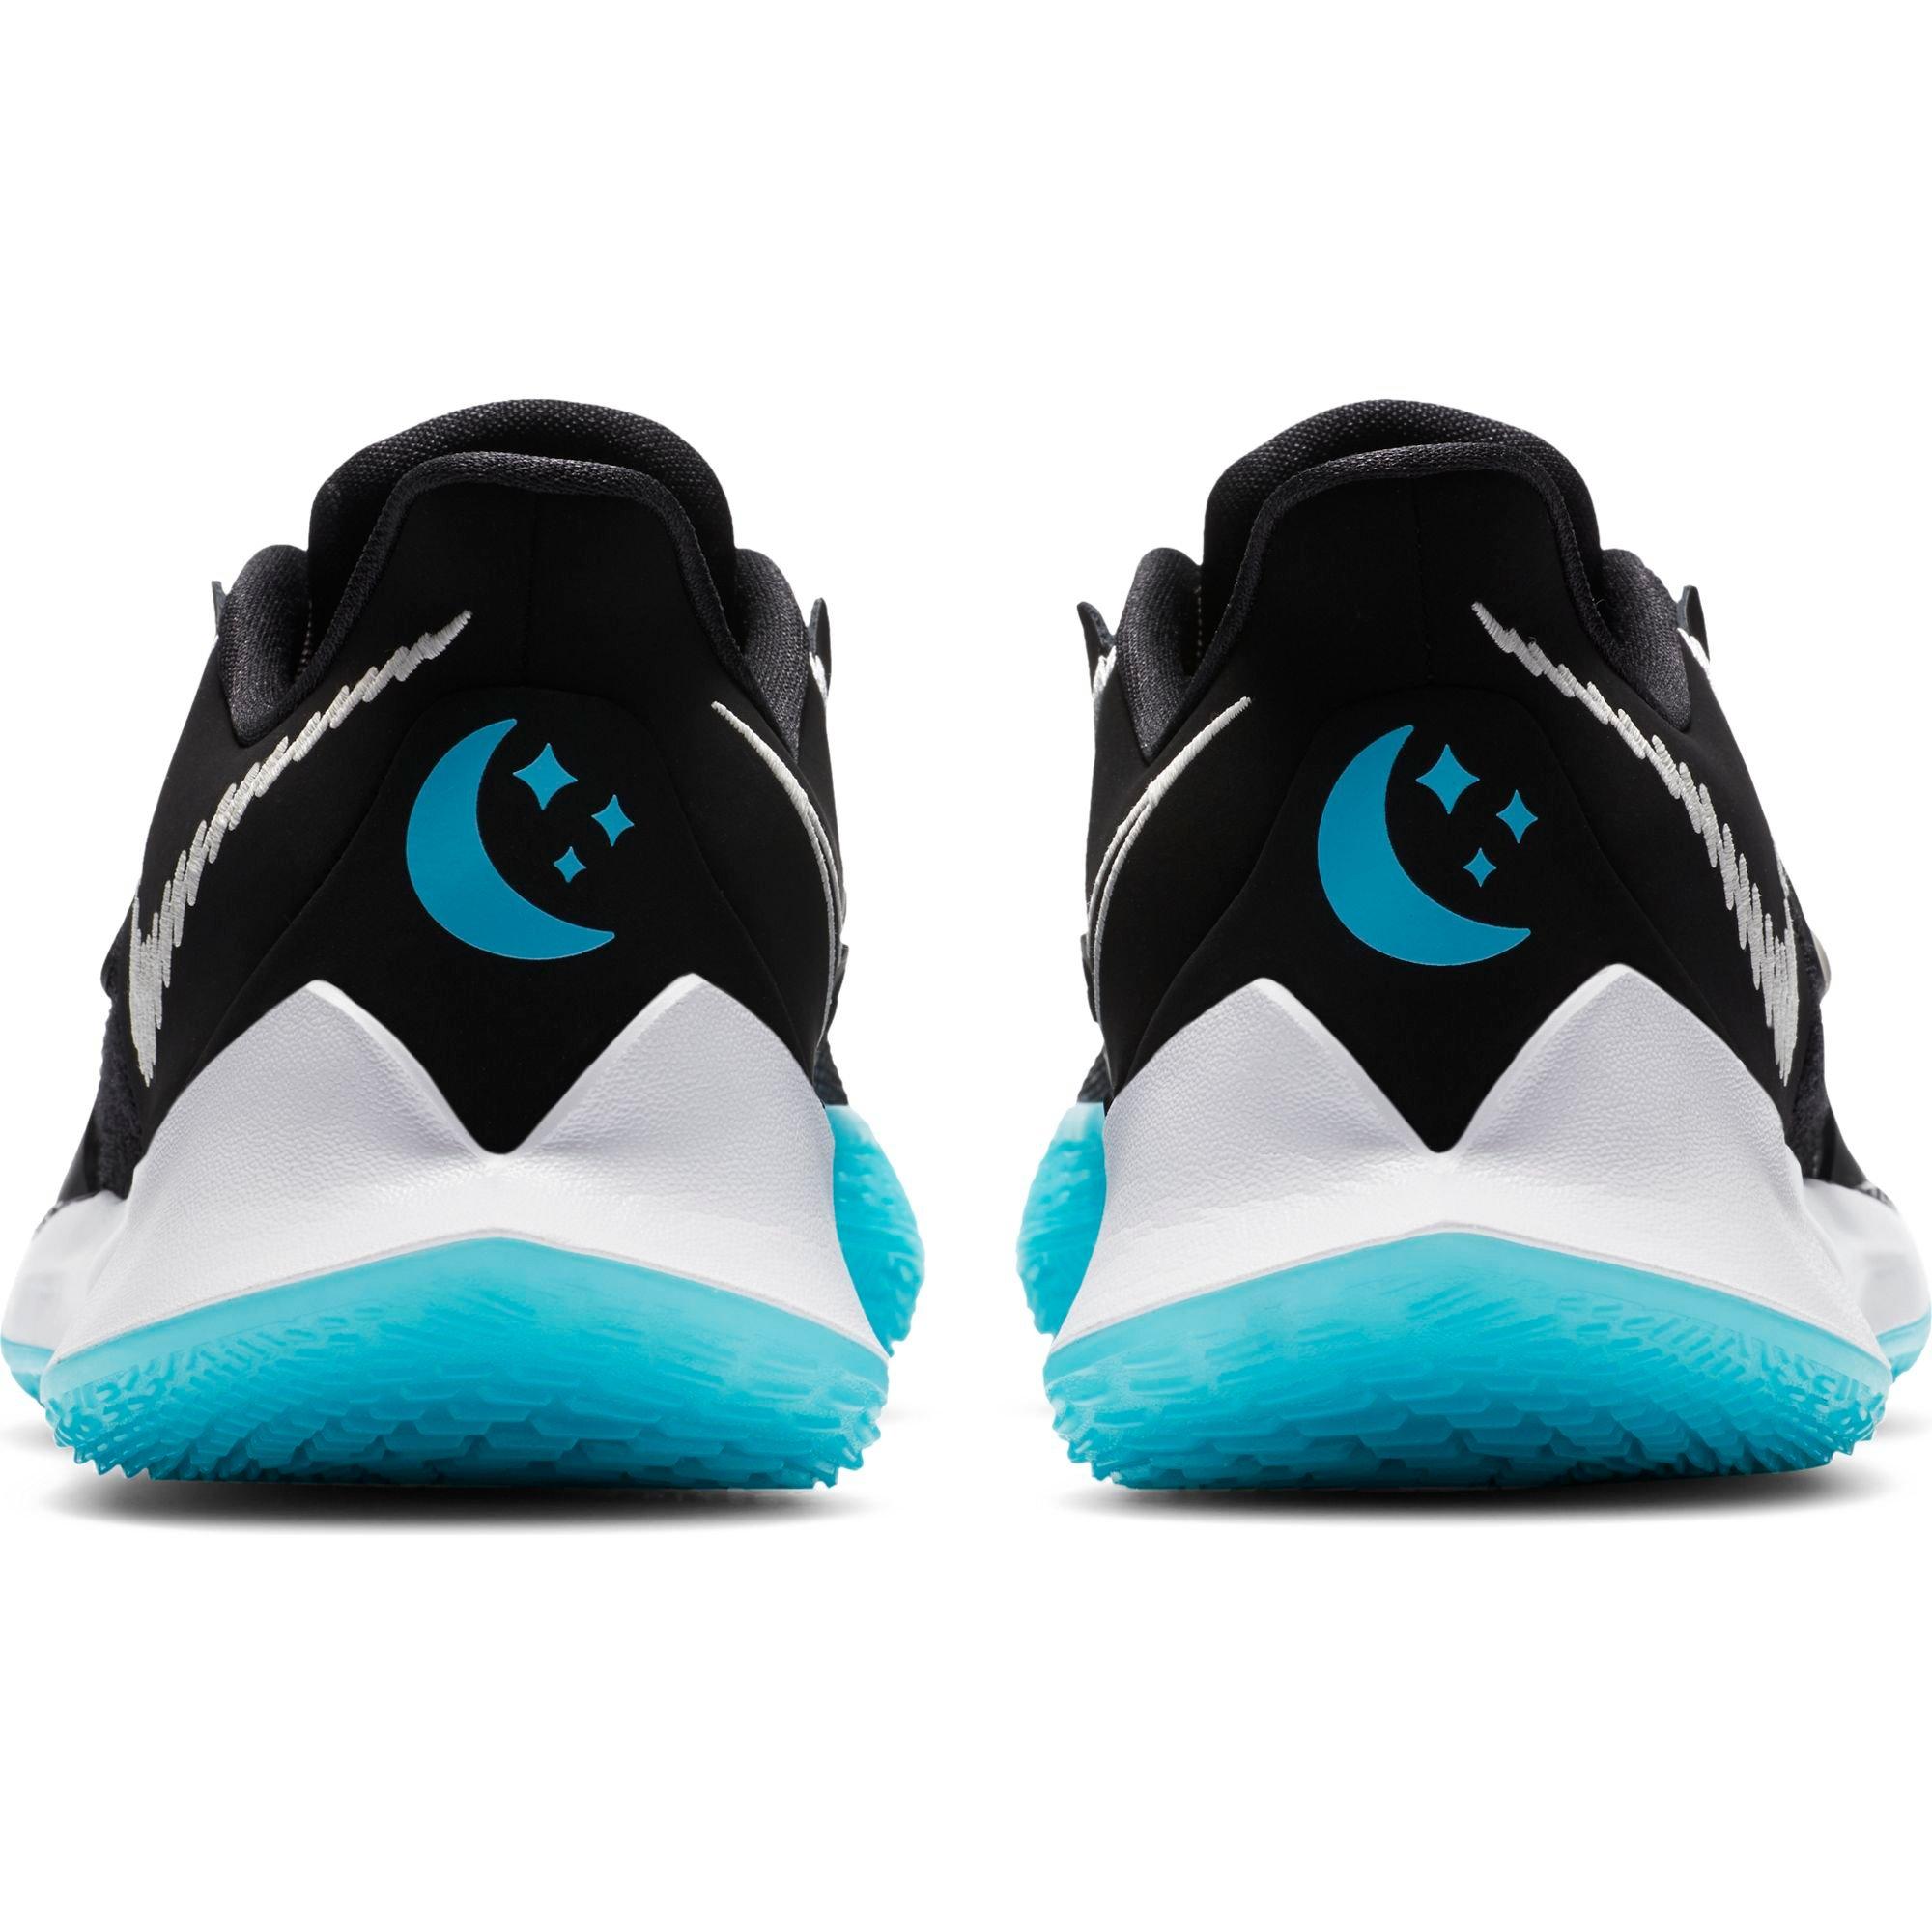 kyrie shoes low tops